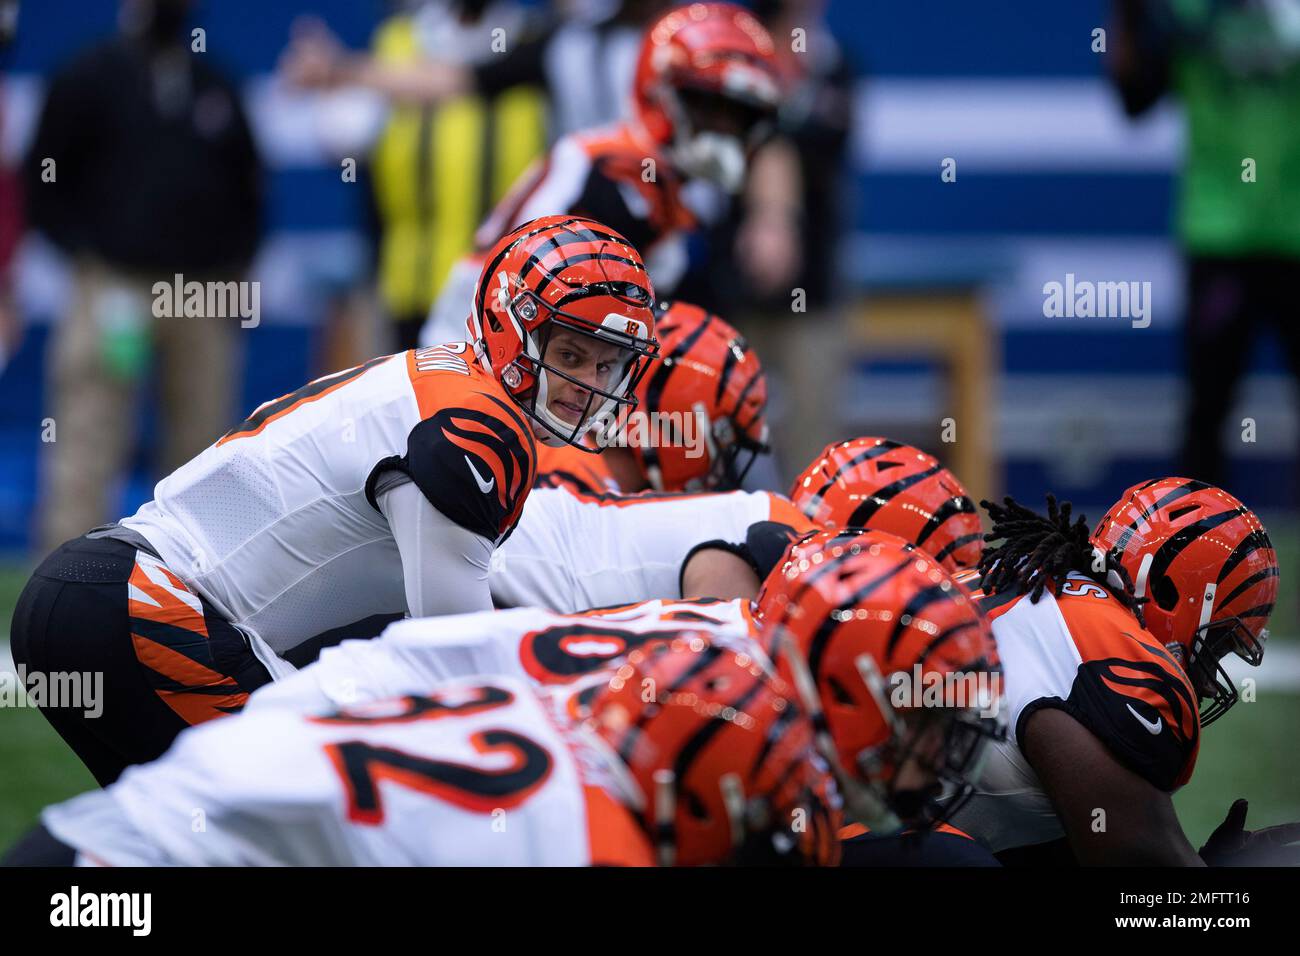 Cincinnati Bengals quarterback Joe Burrow (9) looks out to his receivers  during an NFL football game between the Indianapolis Colts and Cincinnati  Bengals, Sunday, Oct. 18, 2020, in Indianapolis. (AP Photo/Zach Bolinger